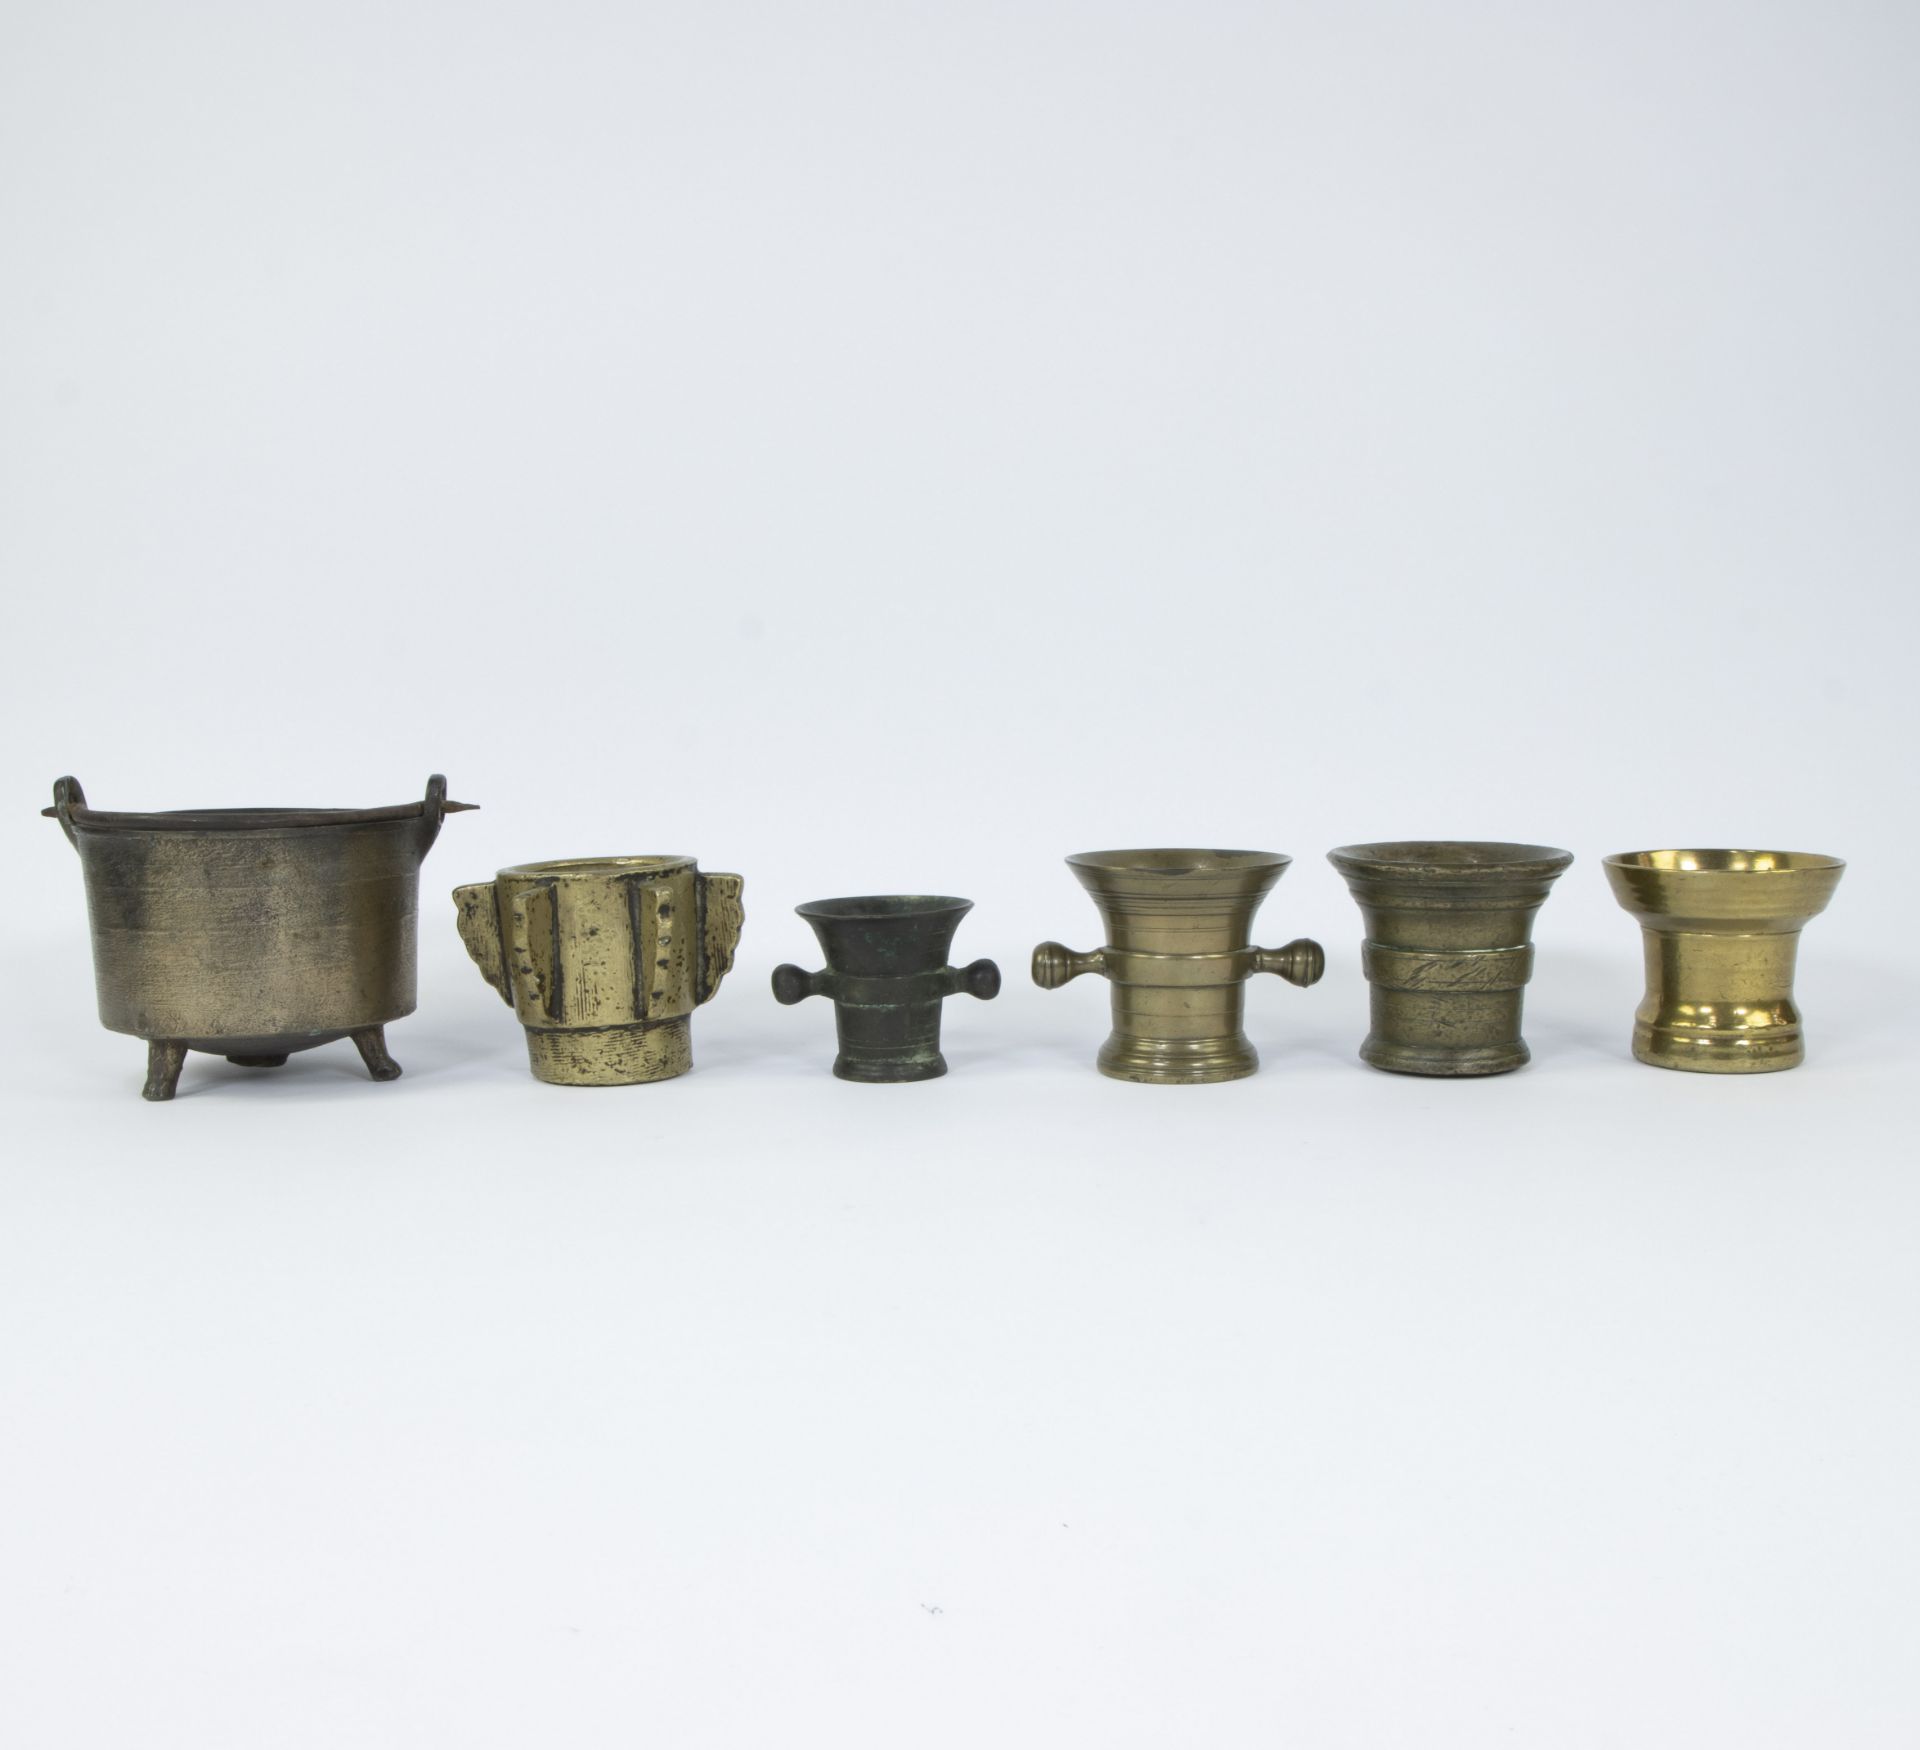 Lot of 5 mortars (17th (1), 19th (3) century), Spanish mortar and 17th century cooking pot - Image 2 of 8